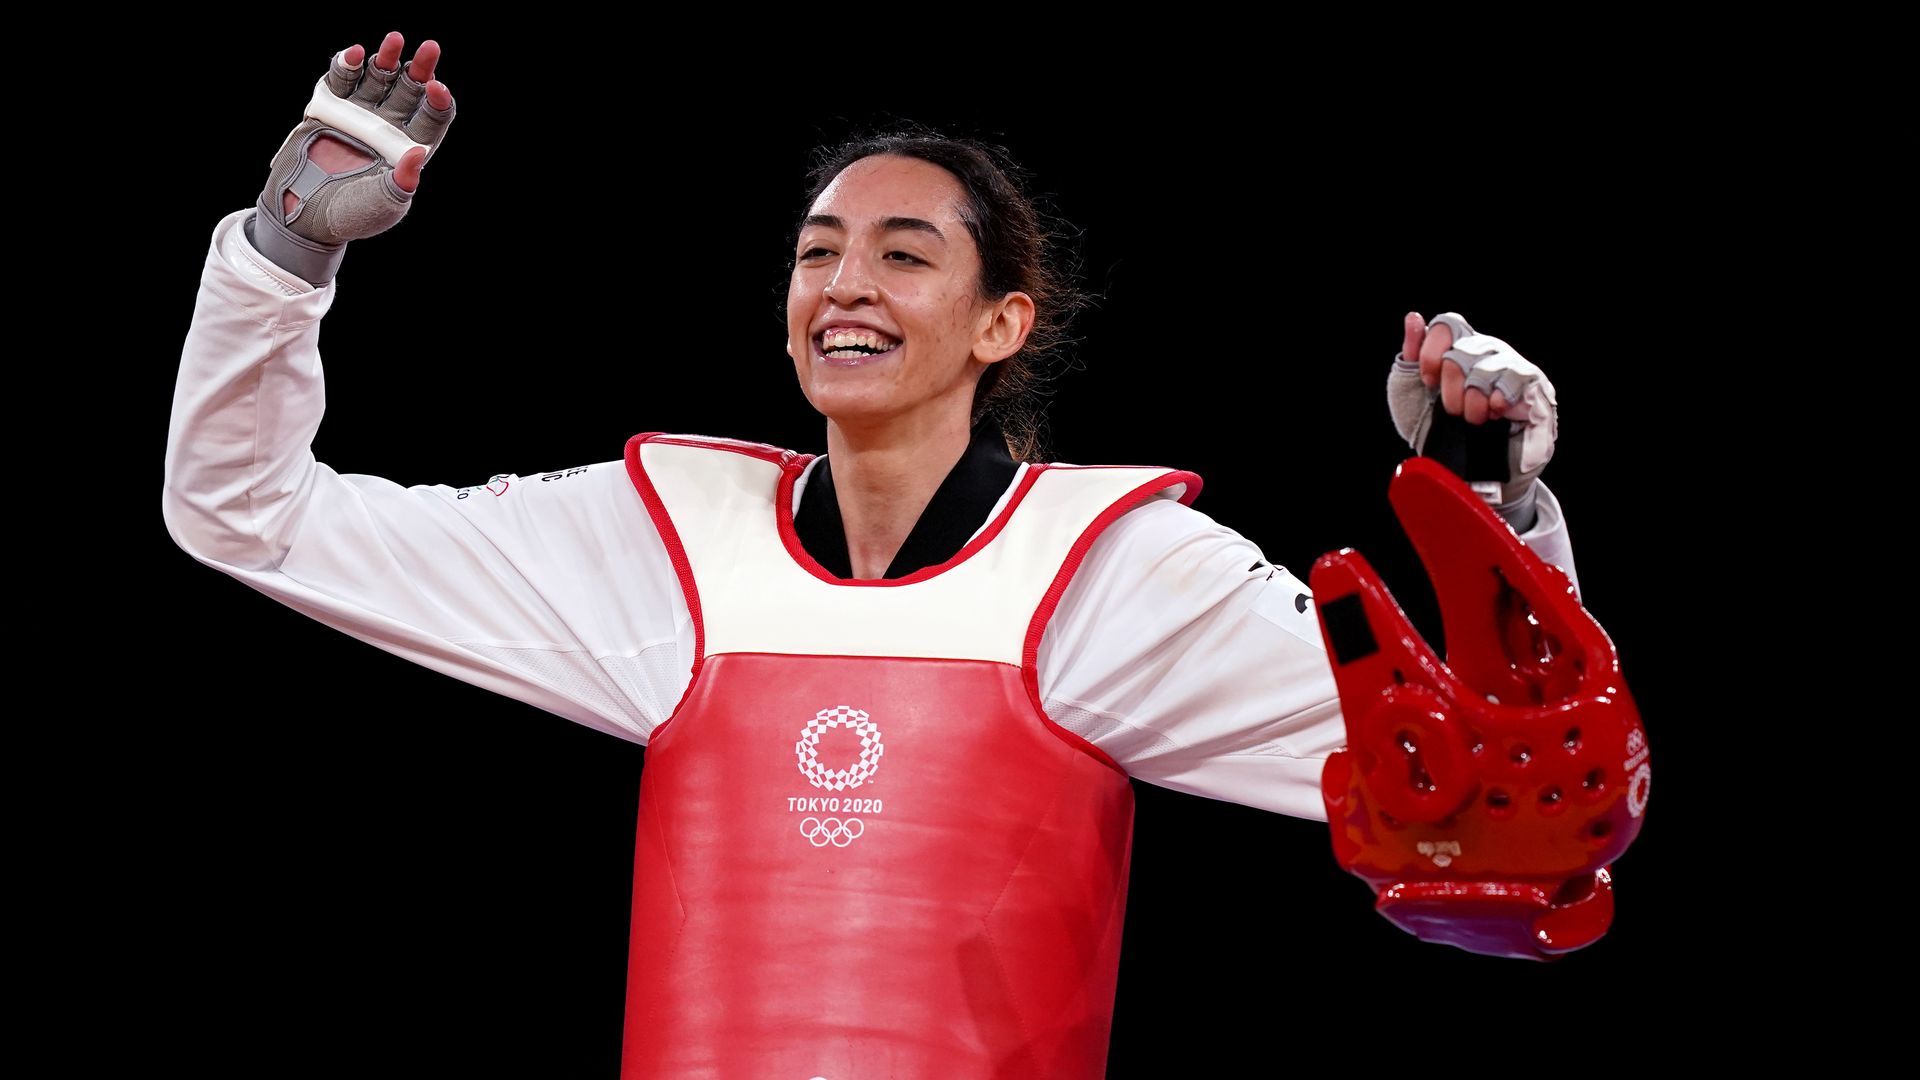 Refugee Olympic Team's Kimia Alizadeh Zonoozi after winning her Olympic Women's -57KG Round of 16 match against Great Britain's Jade Jones  in Japan, Sunday